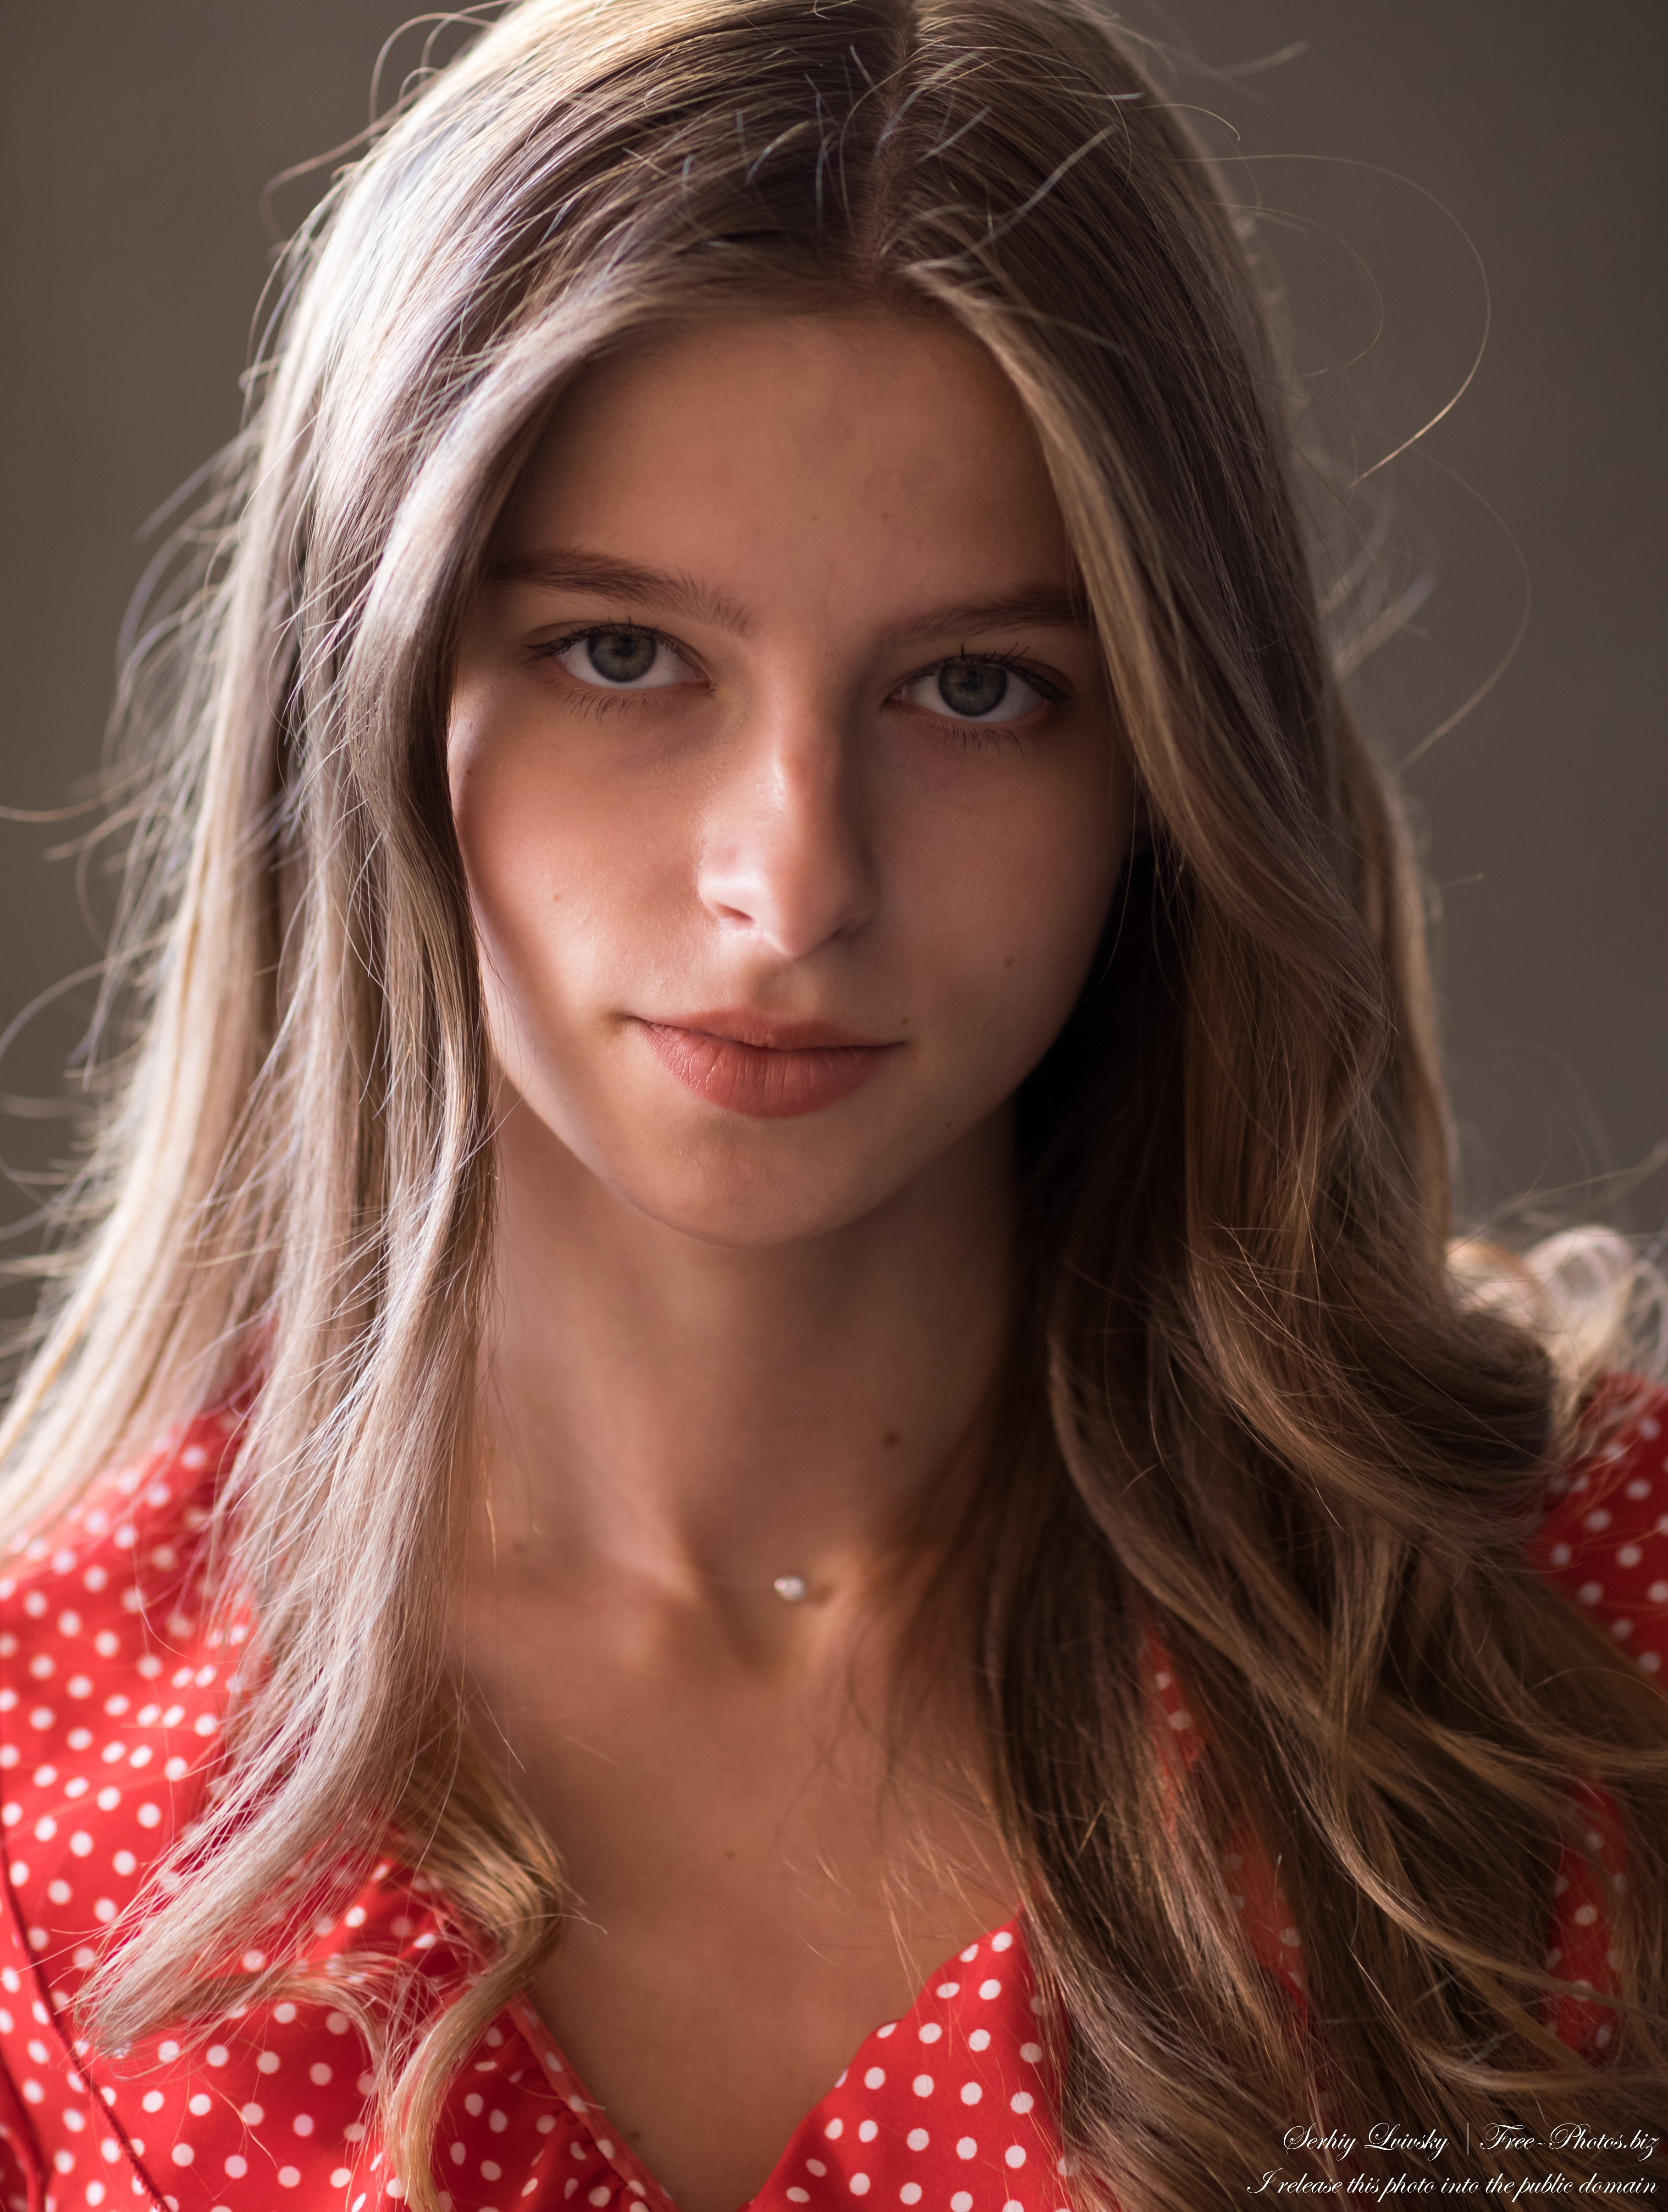 juliana_a_17-year-old_fair-haired_girl_photographed_by_serhiy_lvivsky_in_sept_2020_21